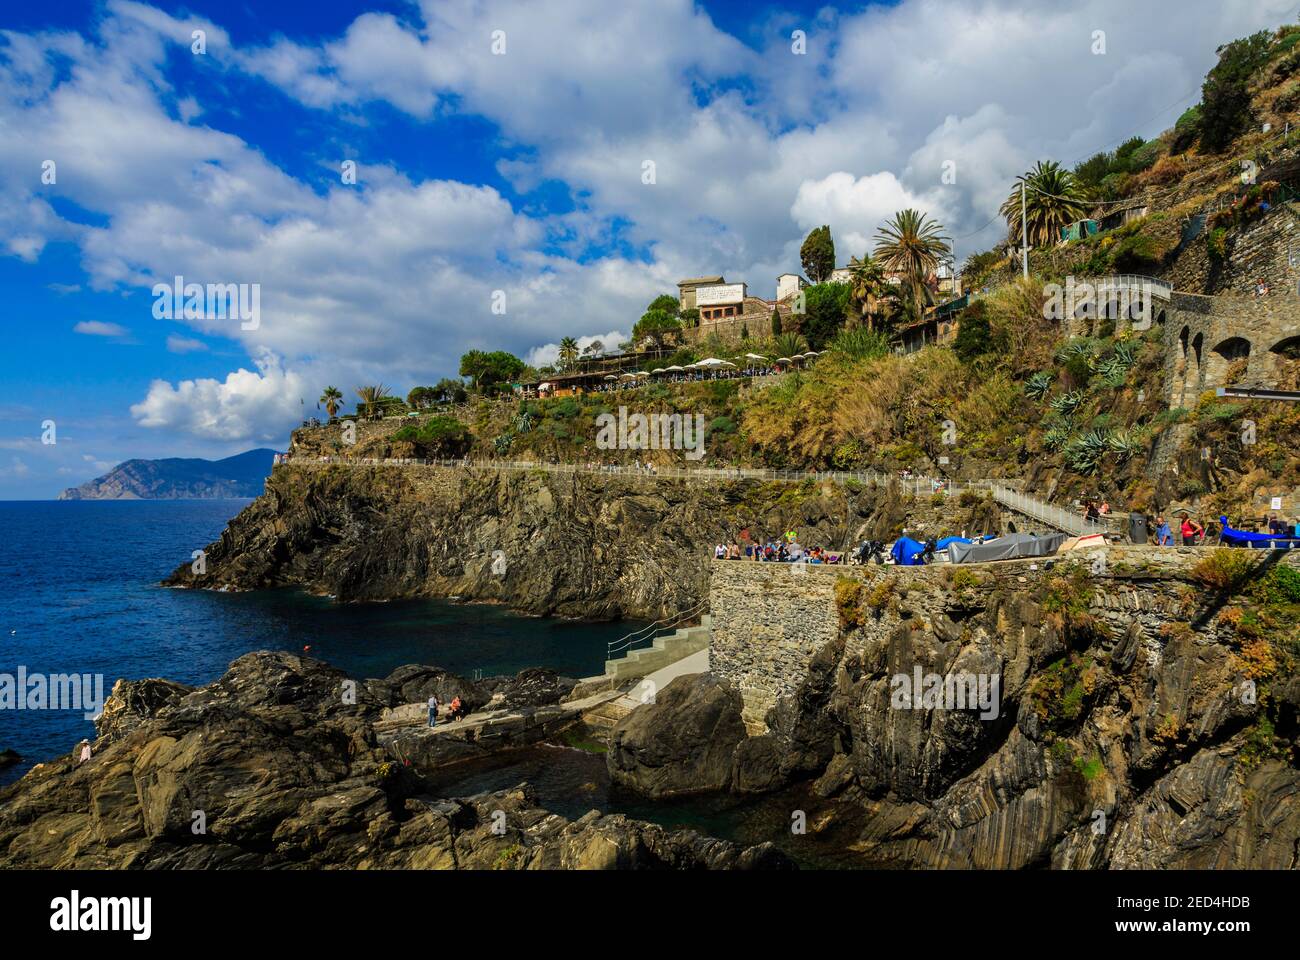 Beautiful seaside day on the rocky coastline and waterfront of Manarola, Cinque Terre, Italy, with a long look down the distant mountains and coast. Stock Photo